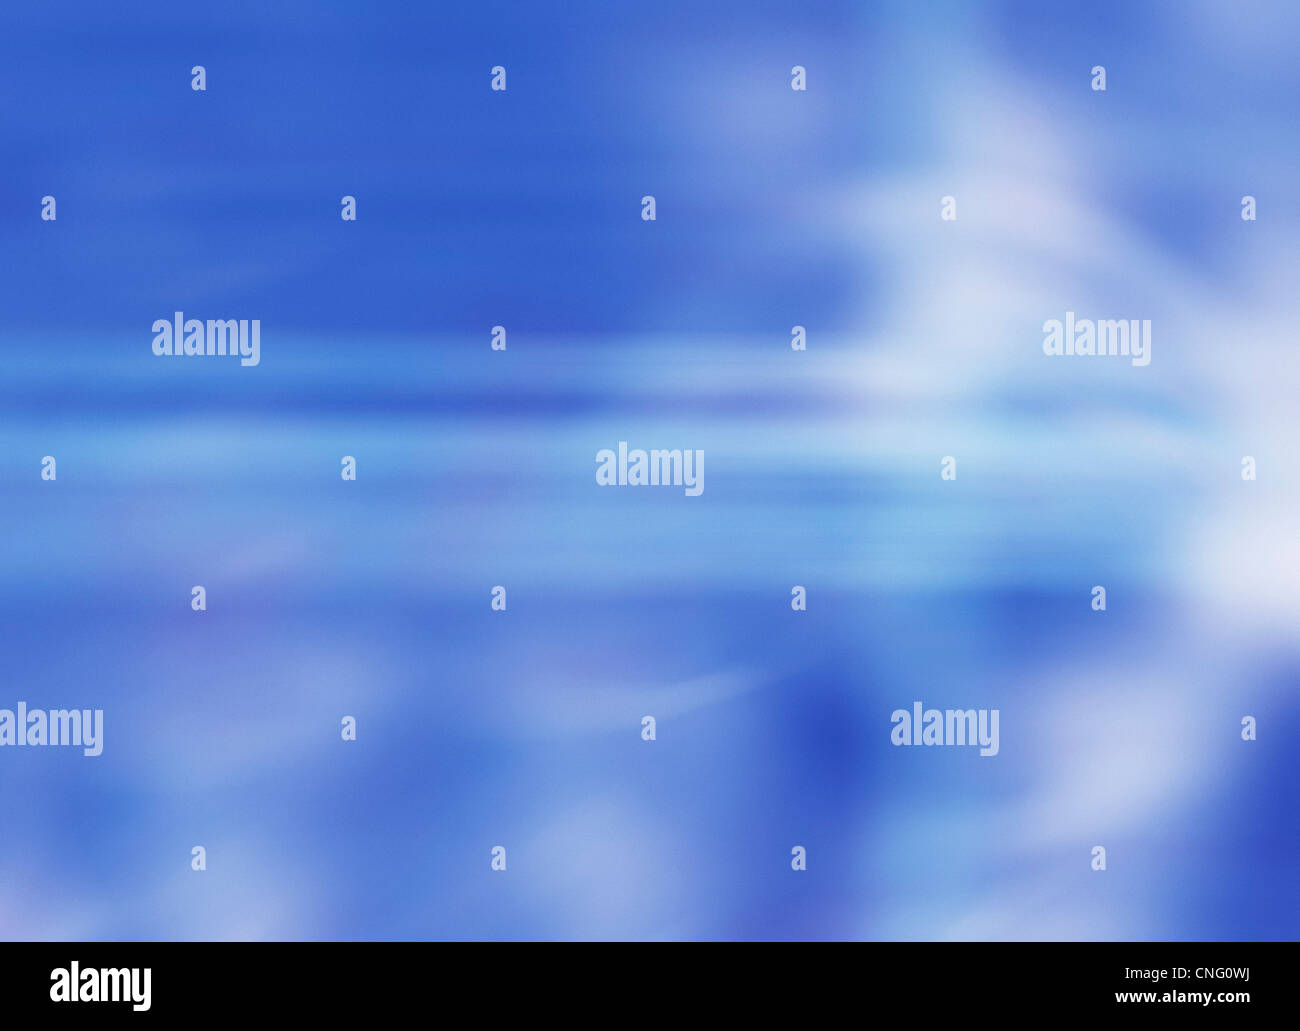 Abstract background artwork Banque D'Images